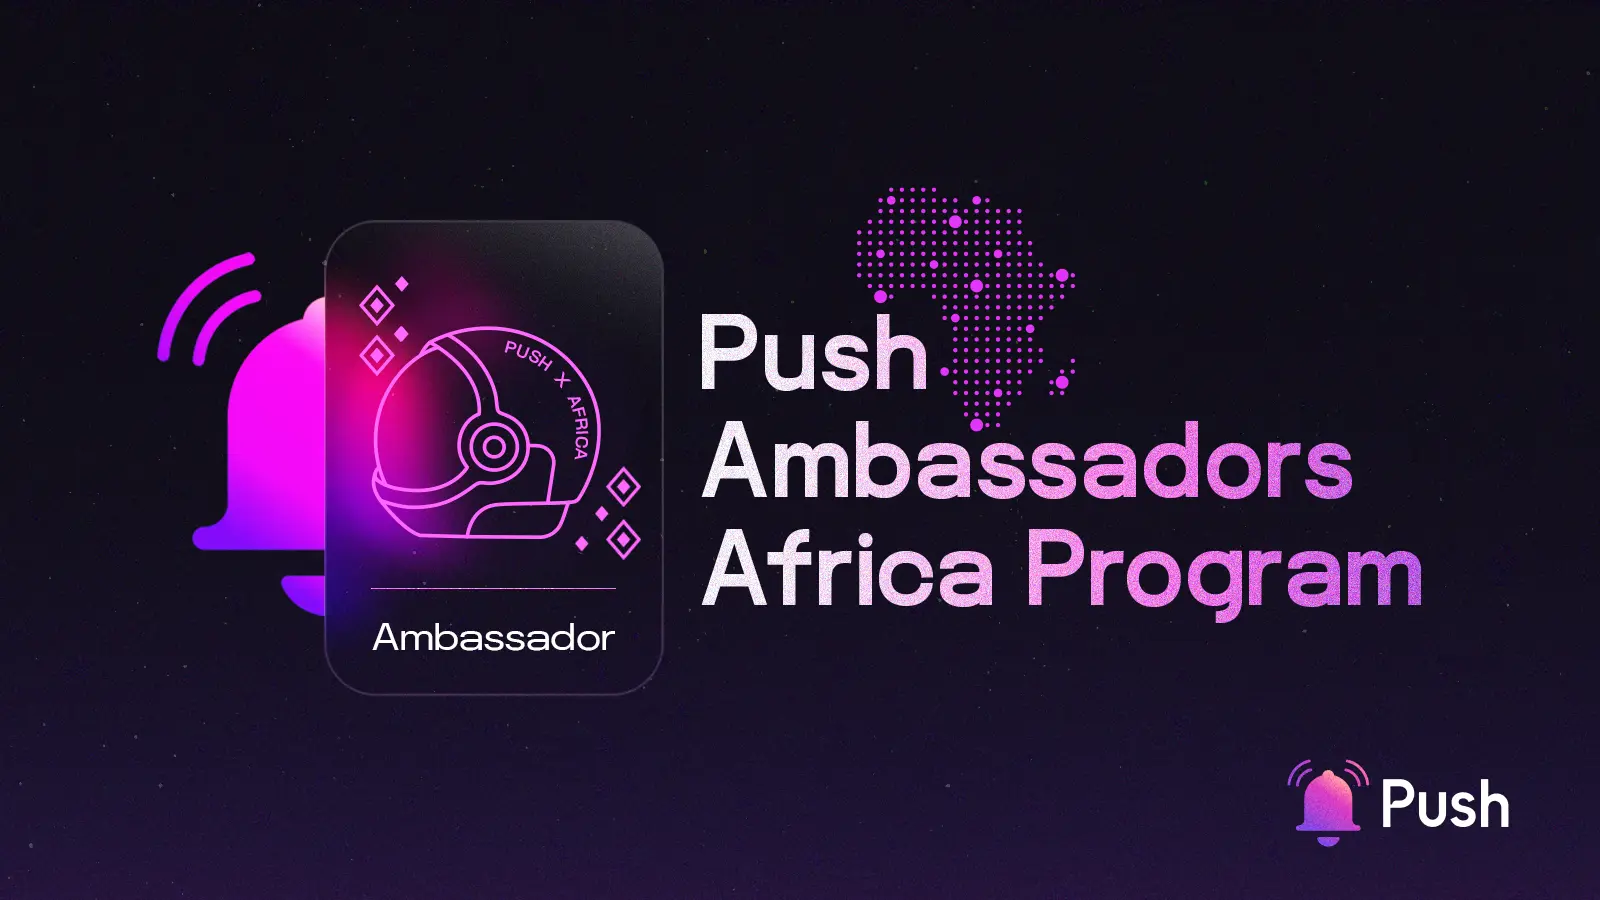 Cover Image of Introducing the Push Ambassador Africa Program🌍